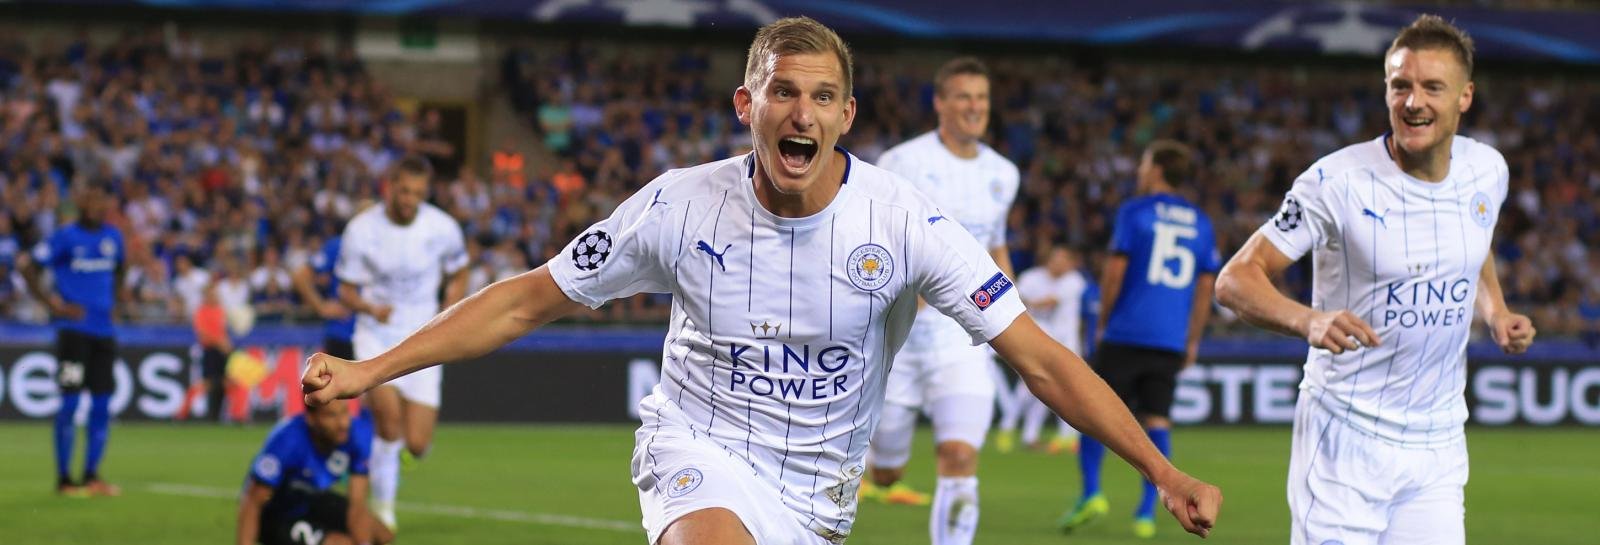 Champions League Round-Up: Leicester’s dream debut, Man City win 4-0 and Spurs struggle at Wembley